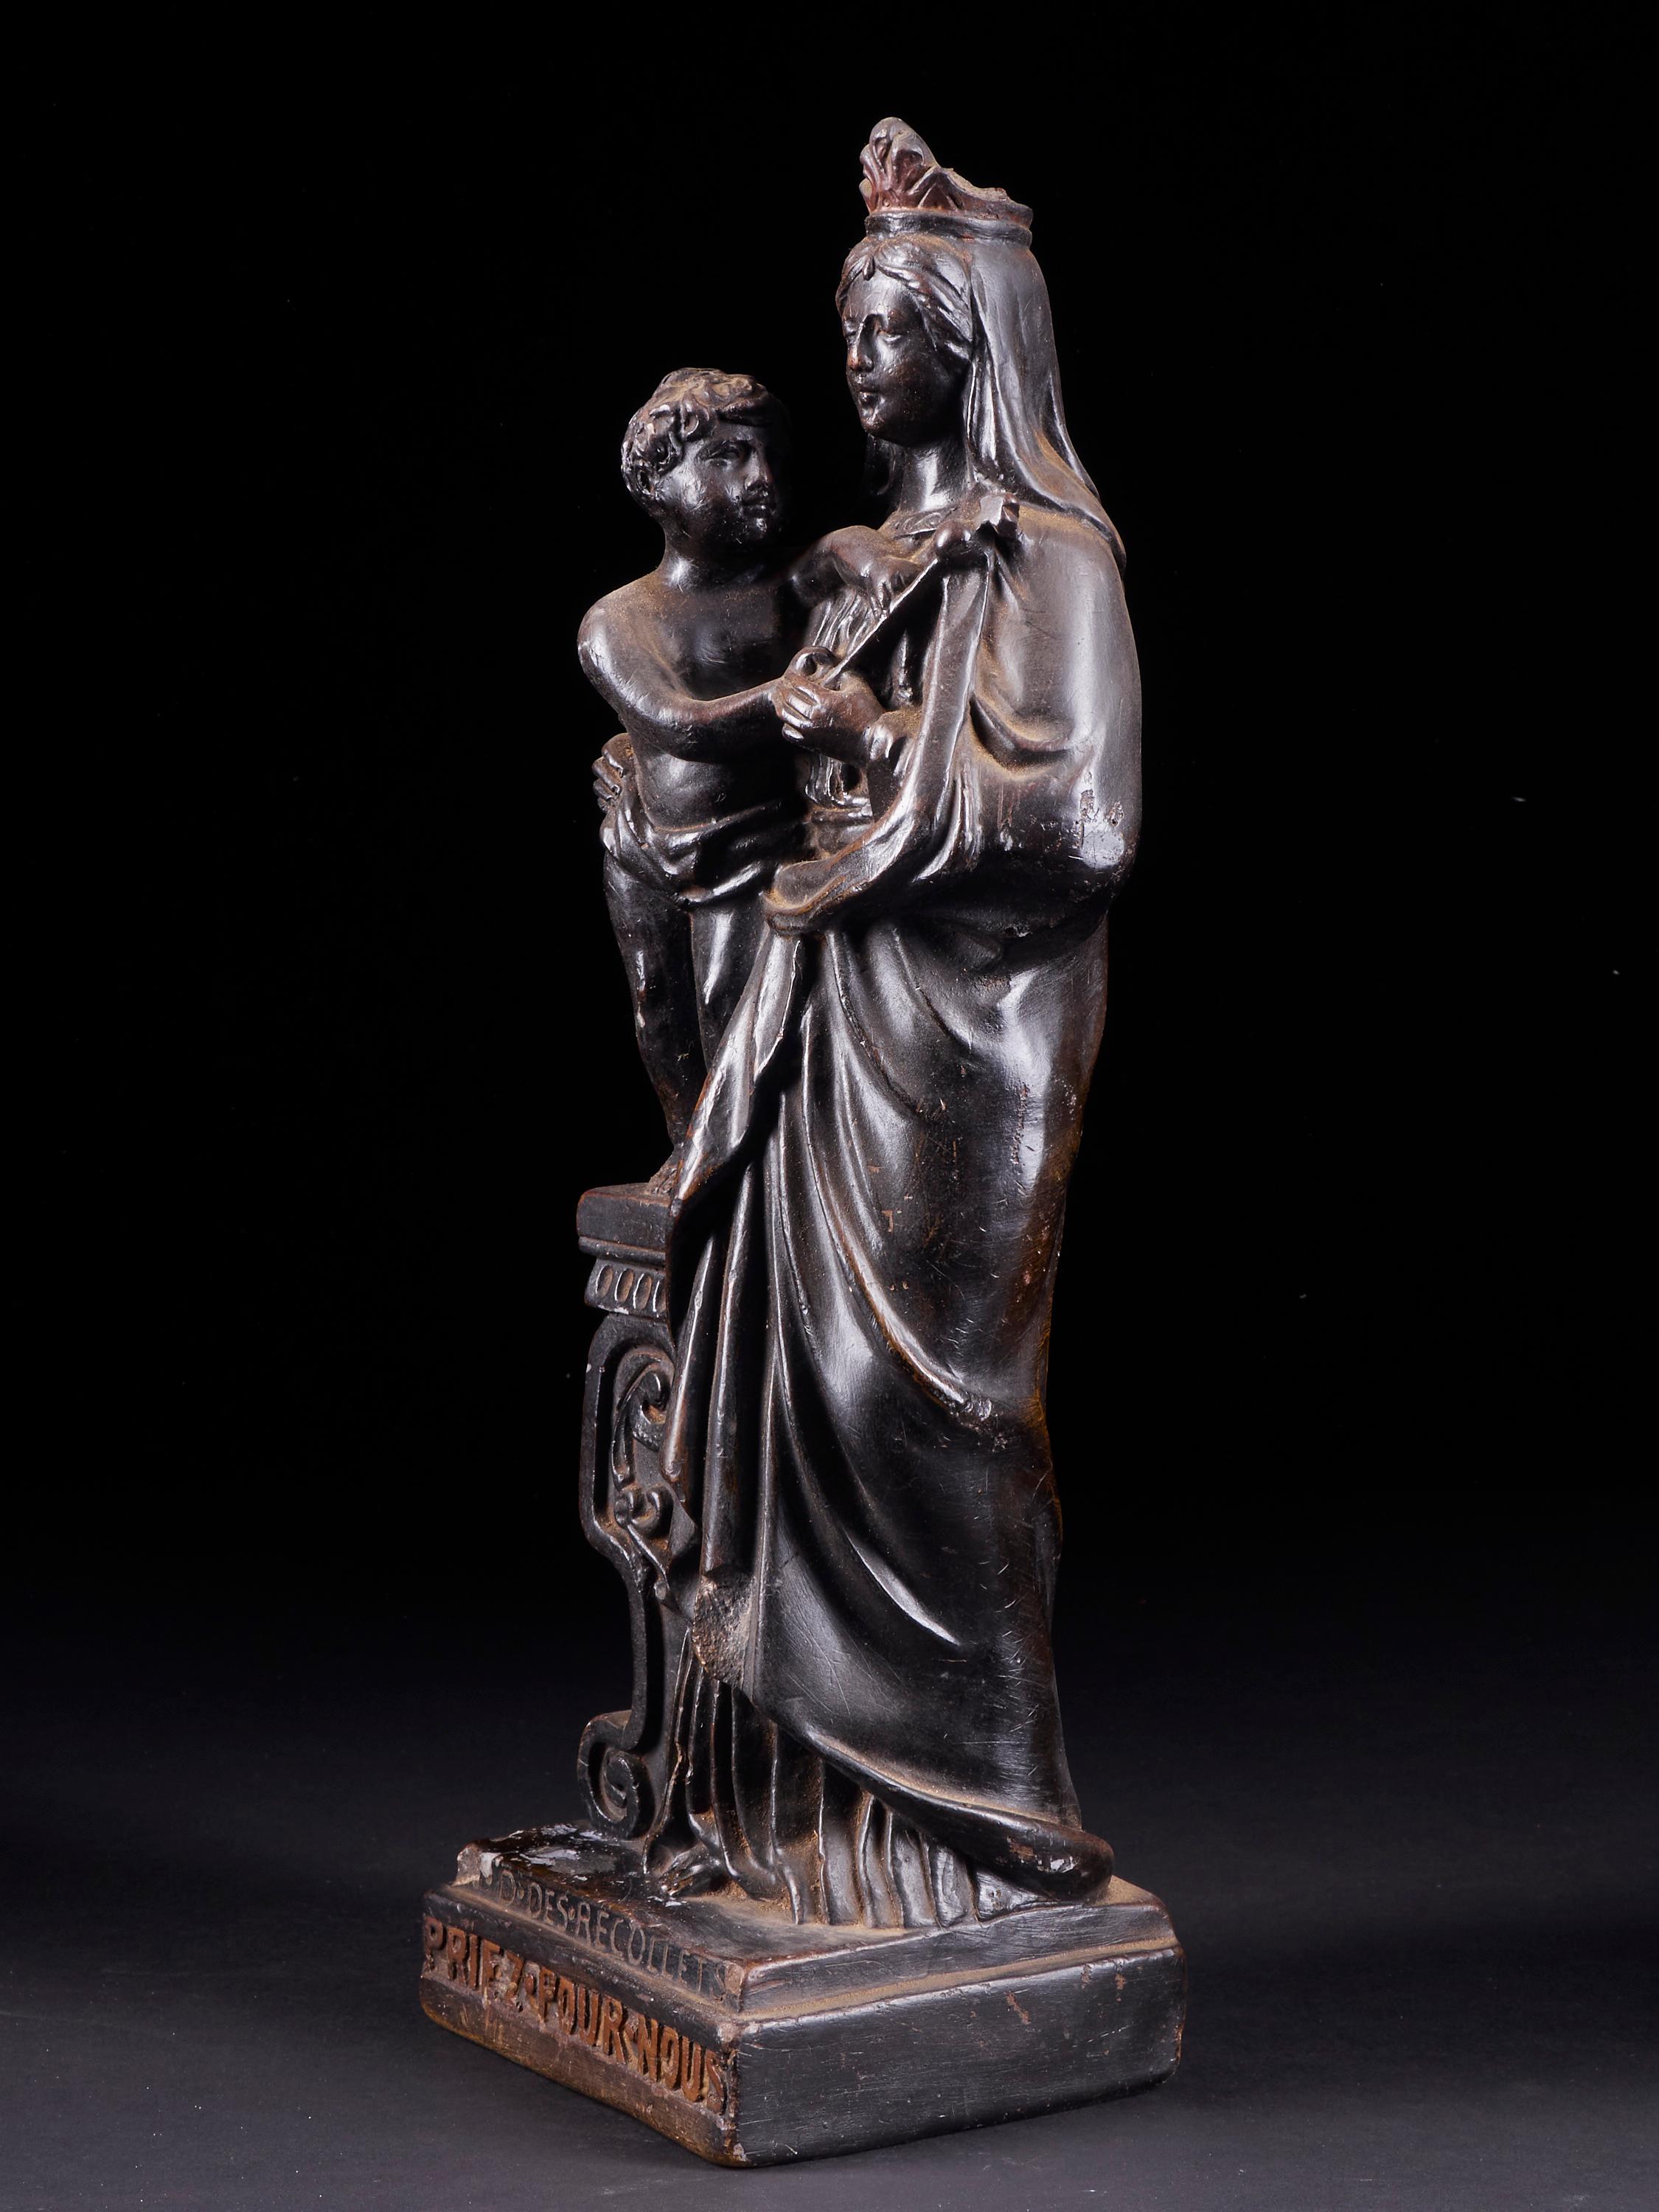 Beautiful black statue crafted in the style of the Miraculous Black Virgin of the Recollets from Verviers parish in Belgium. A signed and marked collectible item.